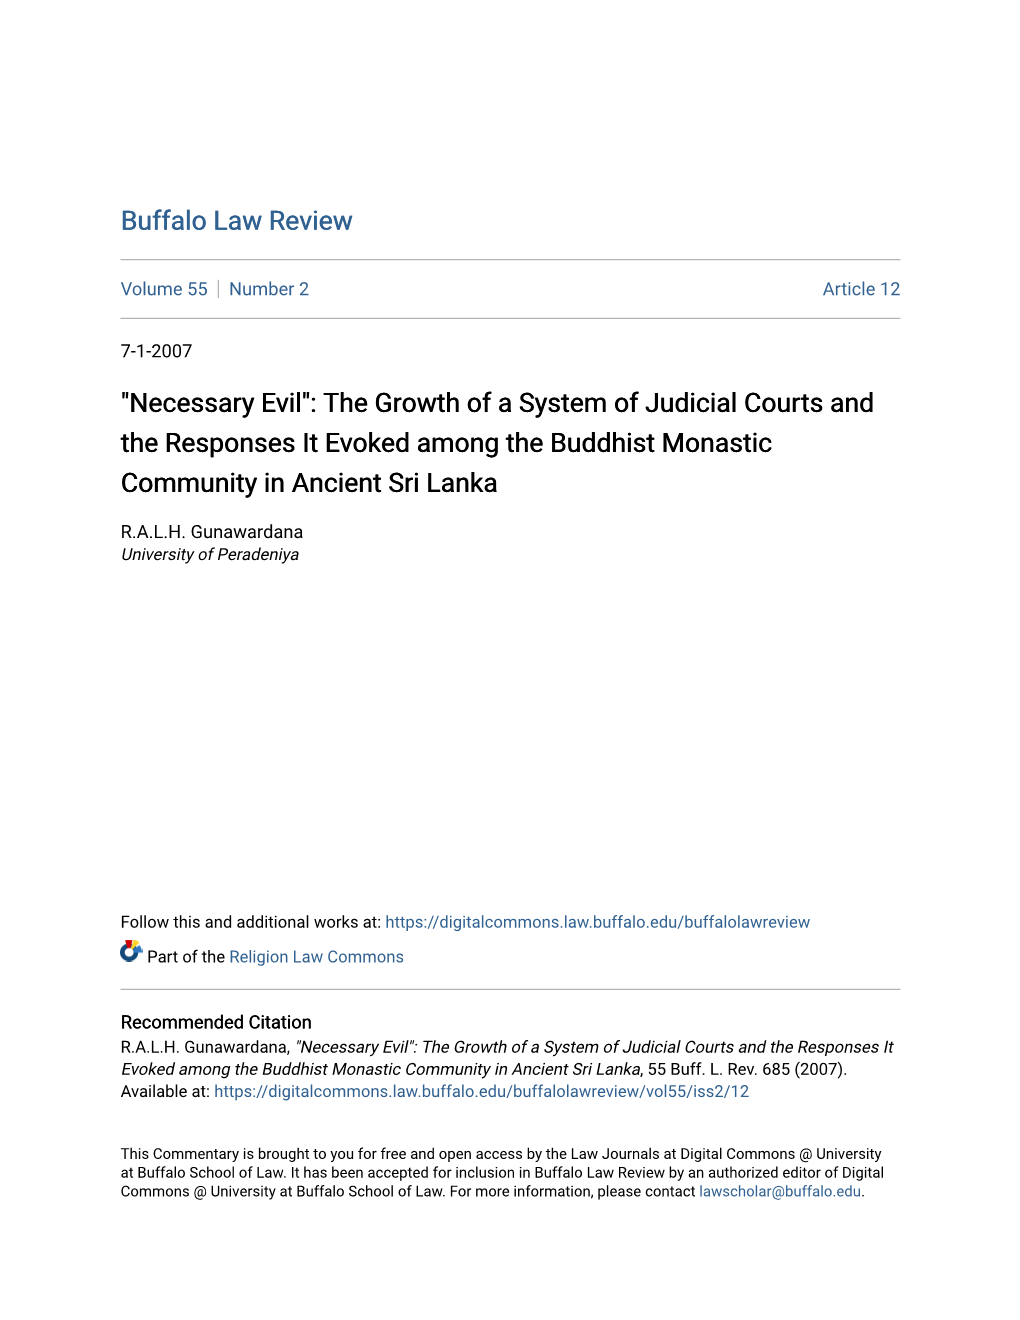 The Growth of a System of Judicial Courts and the Responses It Evoked Among the Buddhist Monastic Community in Ancient Sri Lanka